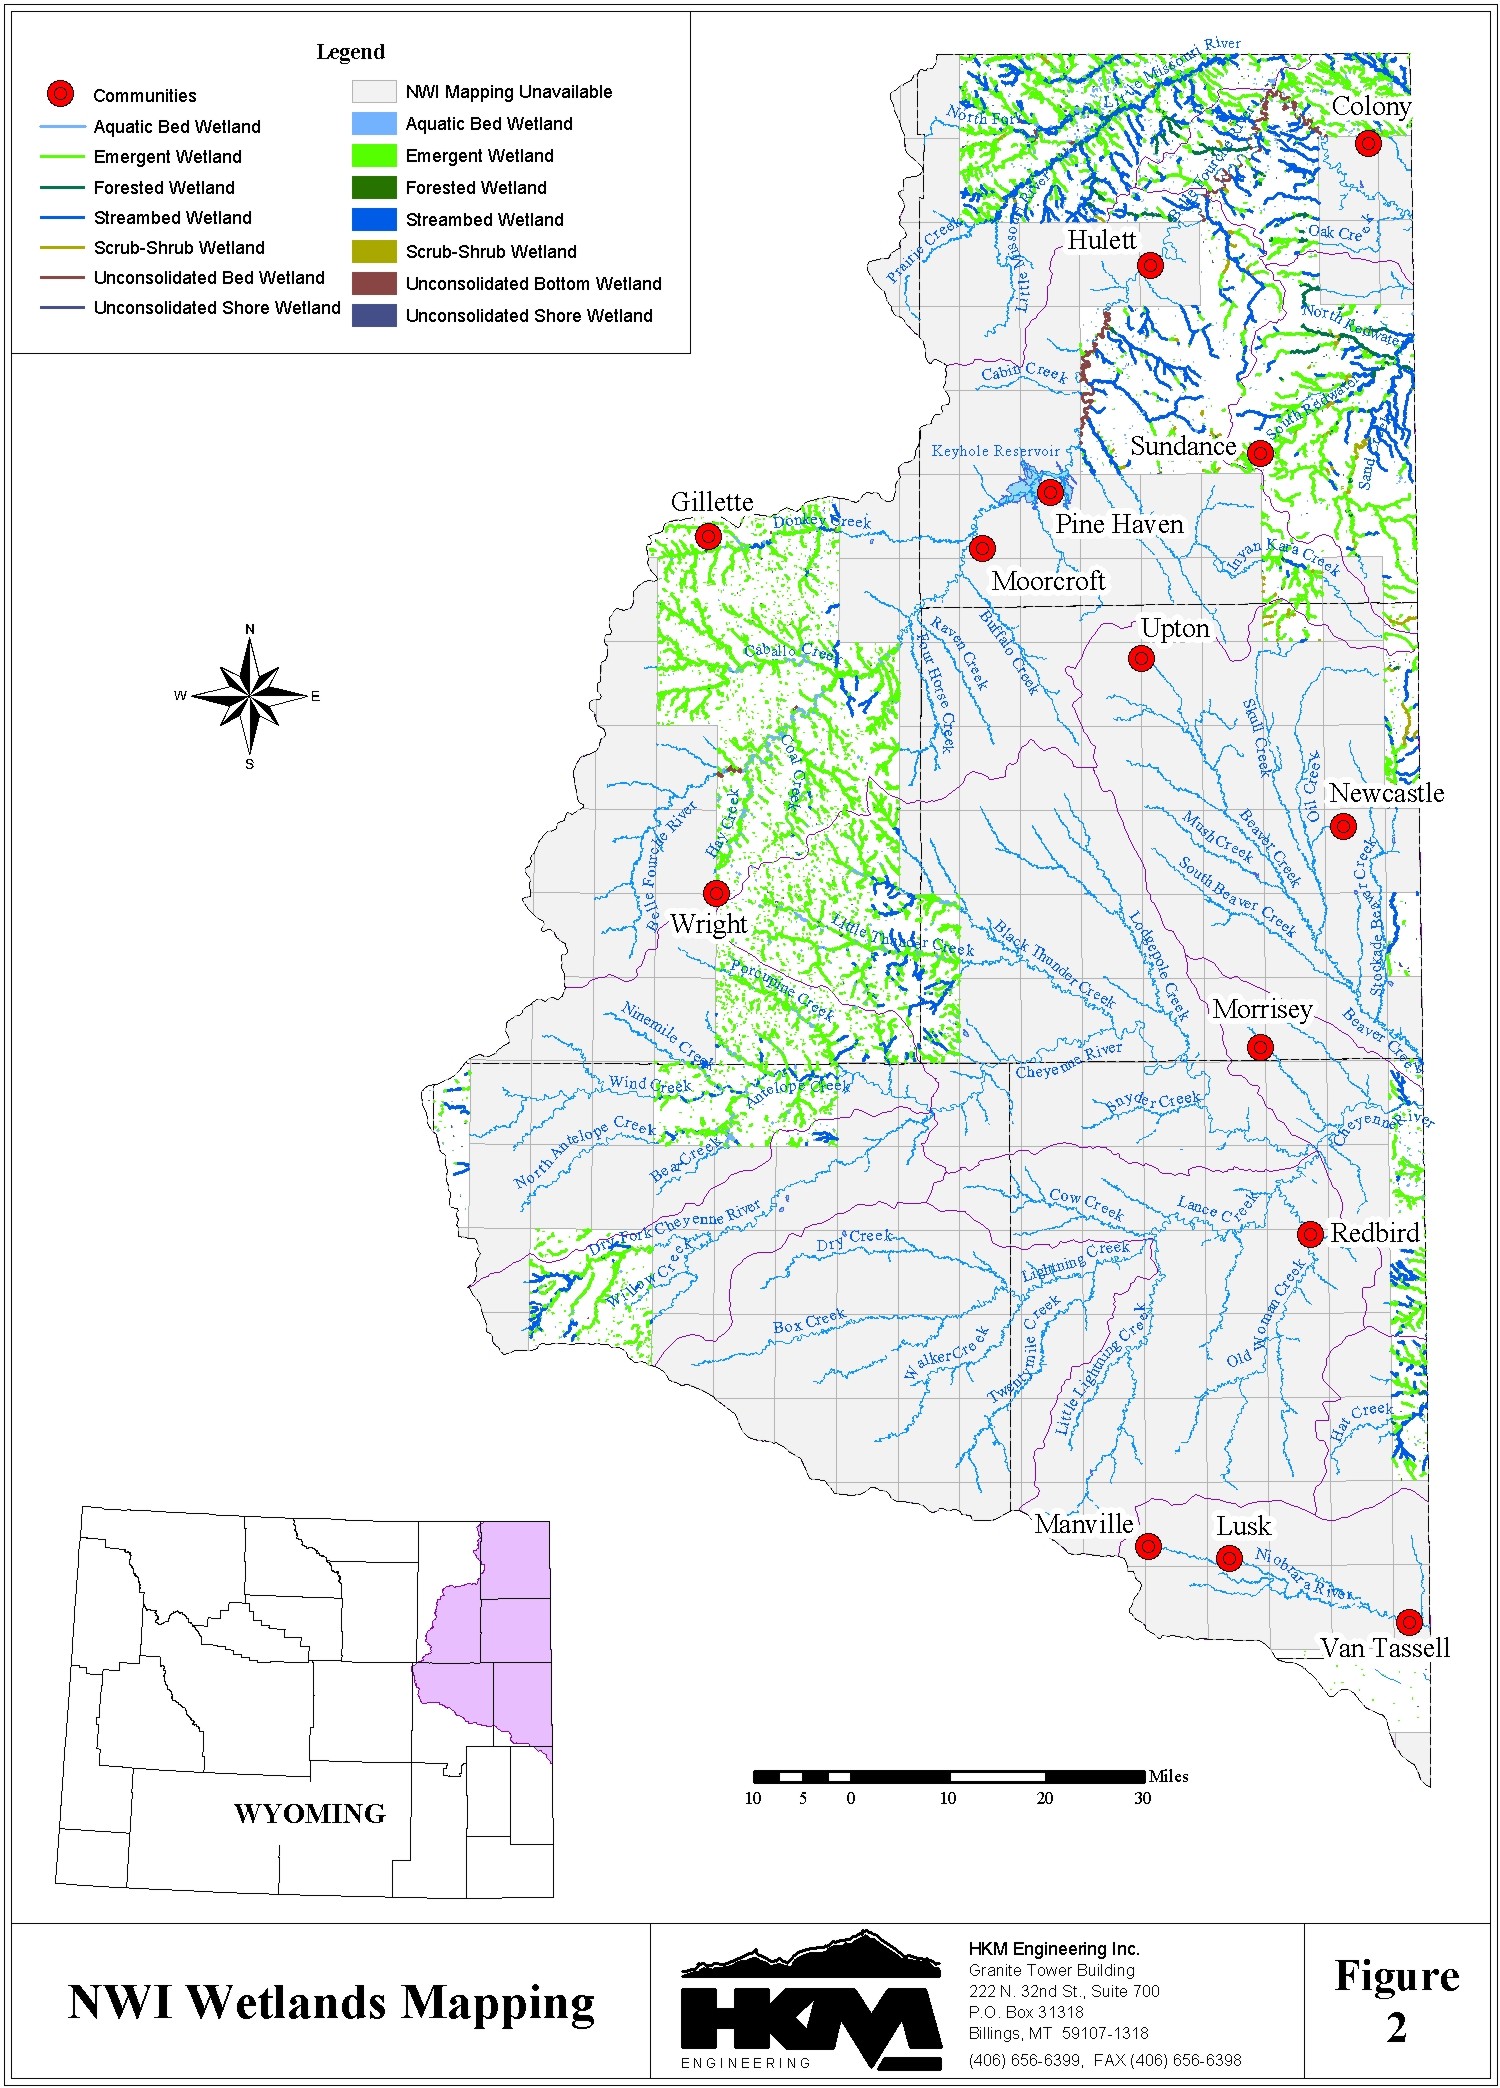 NWI Wetlands Mapping, Northeast Wyoming River Basins